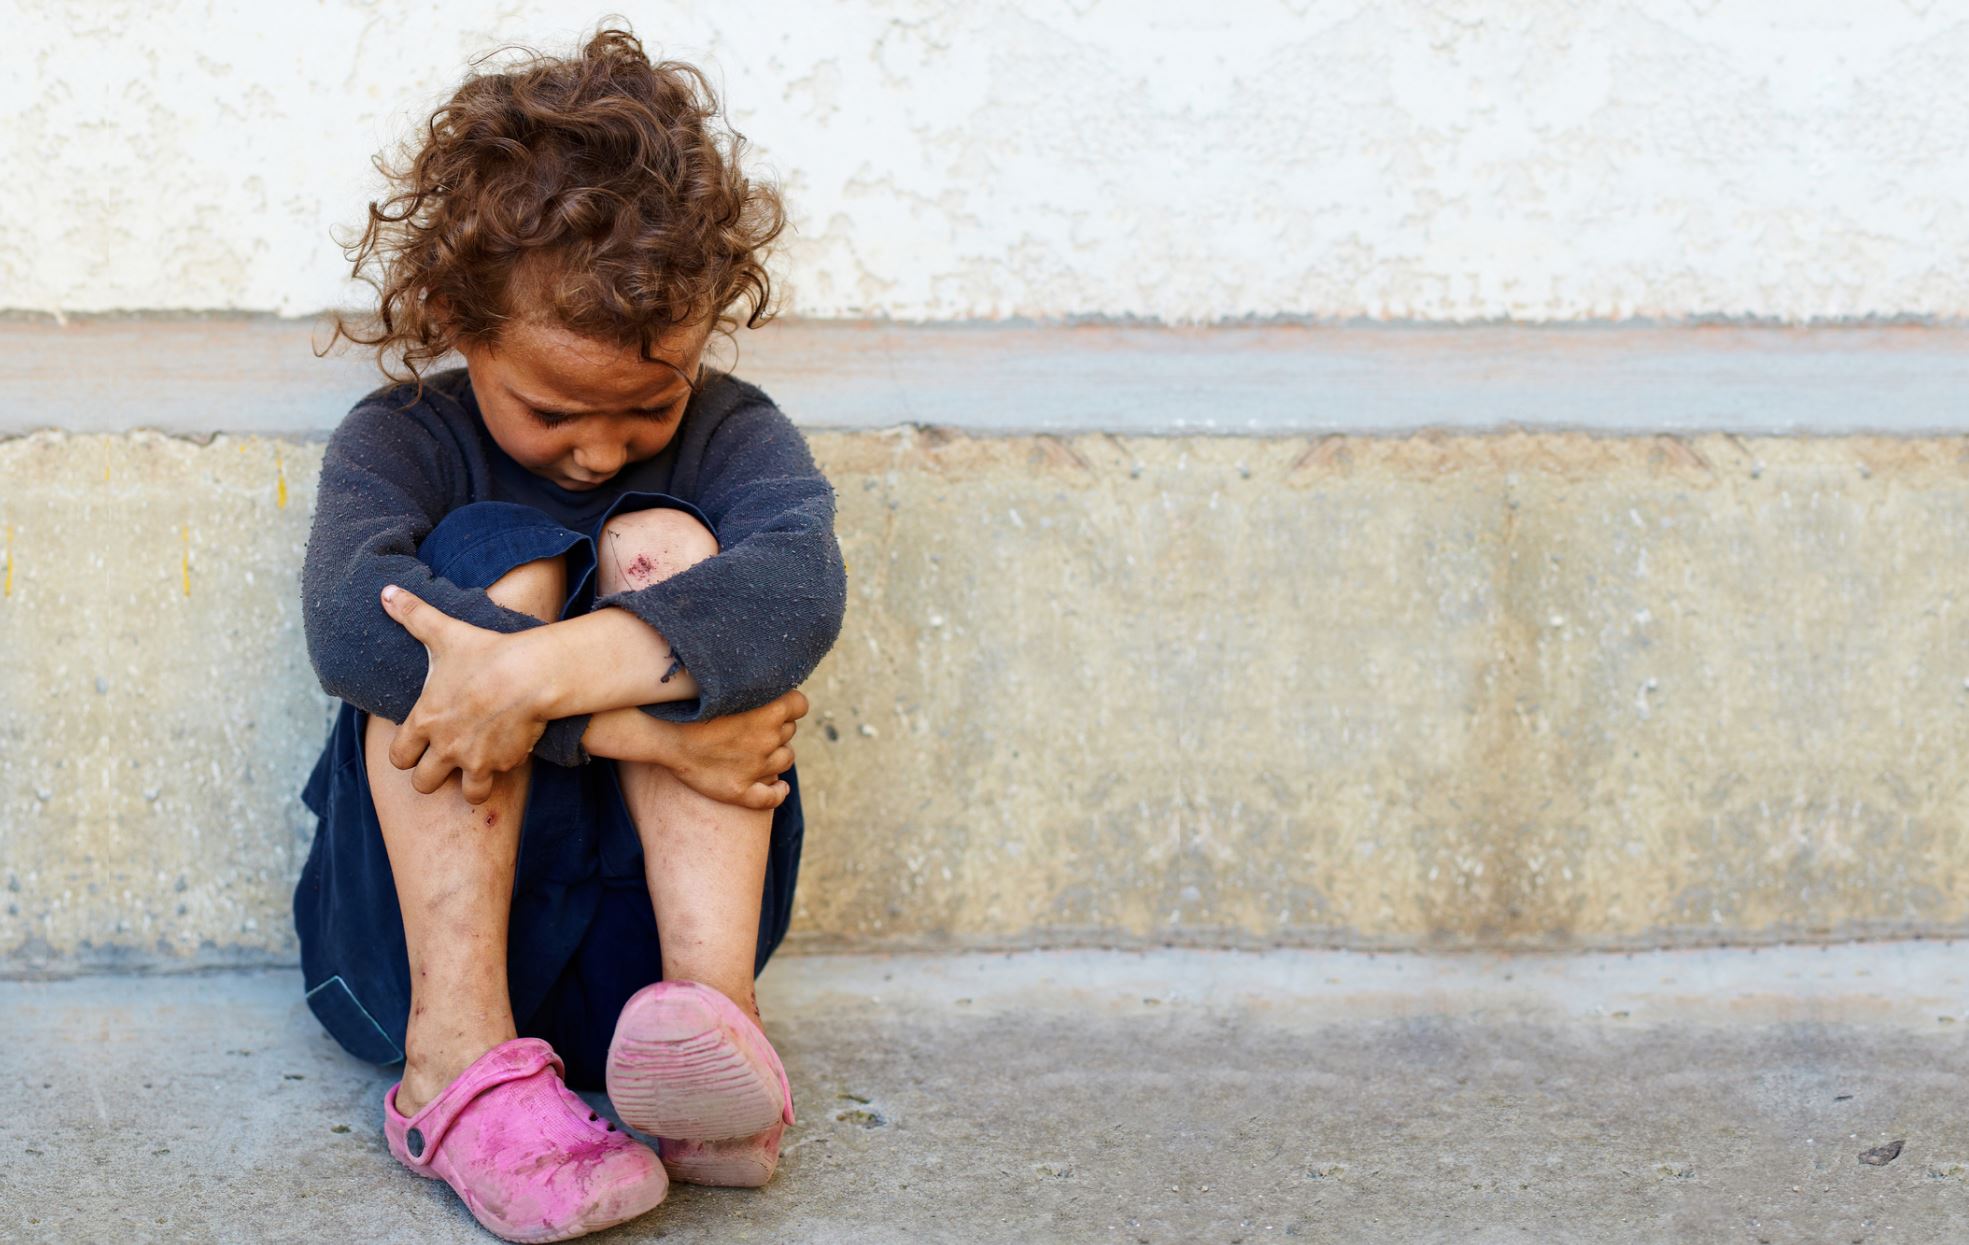 A dirty child in old clothing sits dejectedly on a concrete step. She looks scared and sad.